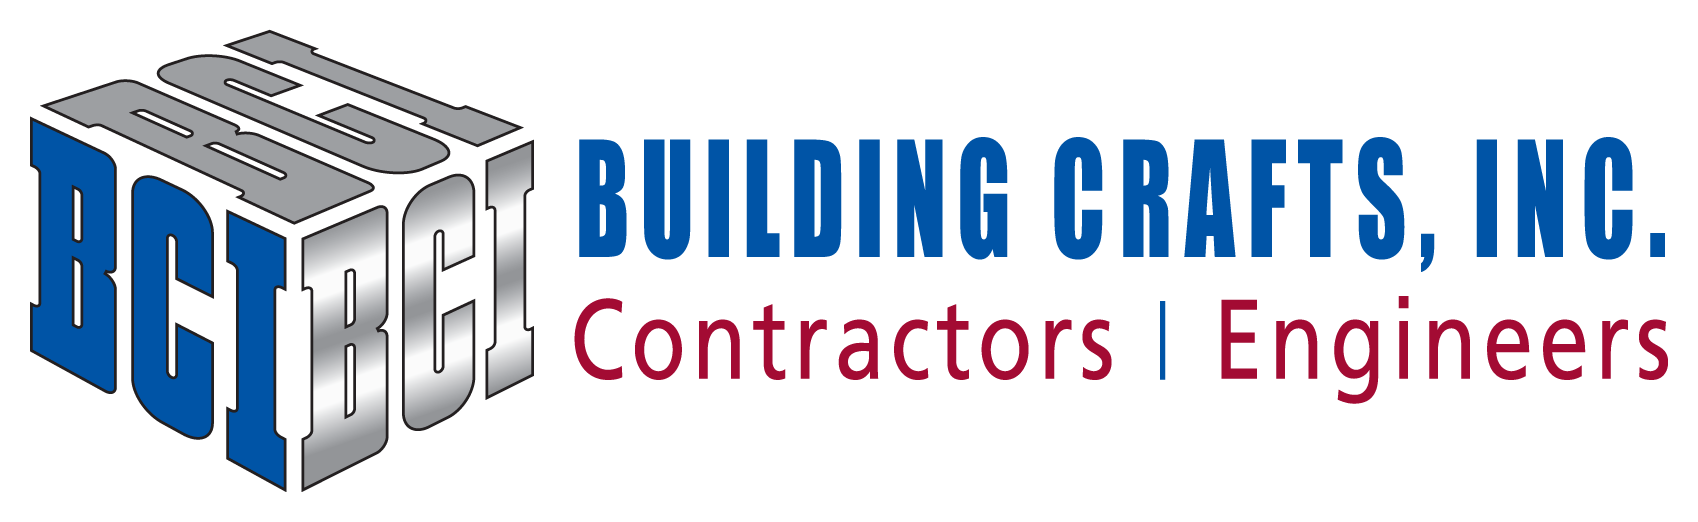 Building Crafts, Inc. – Contractors Engineers for the construction of water, wastewater treatment facilities, and commercial construction, industrial construction and municipal construction